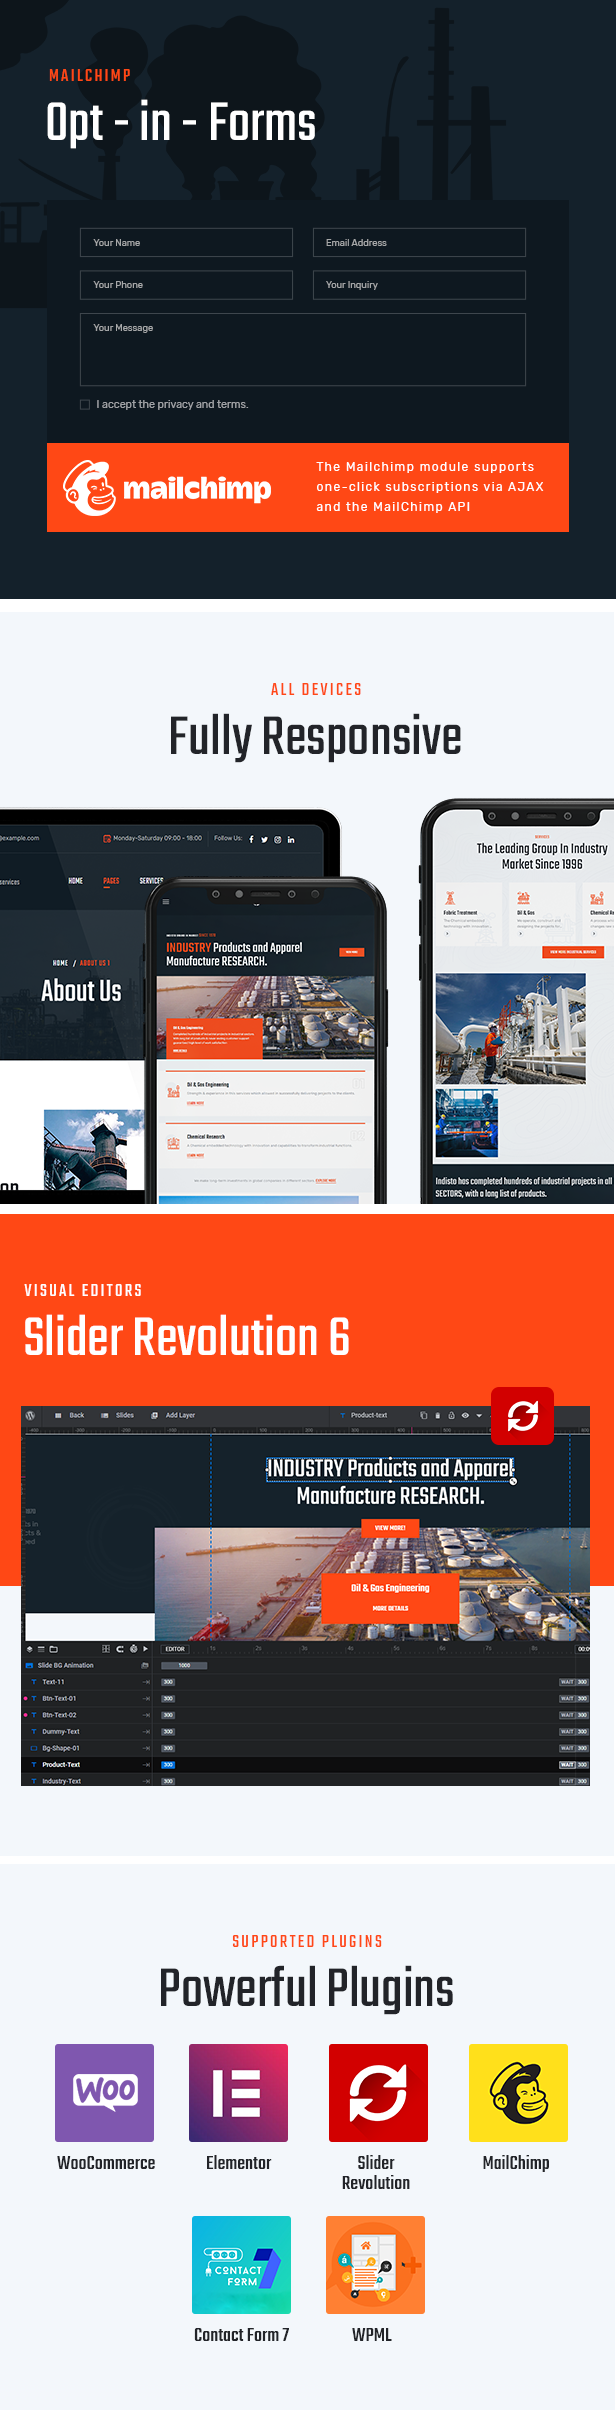 Industries and Factory WordPress Theme